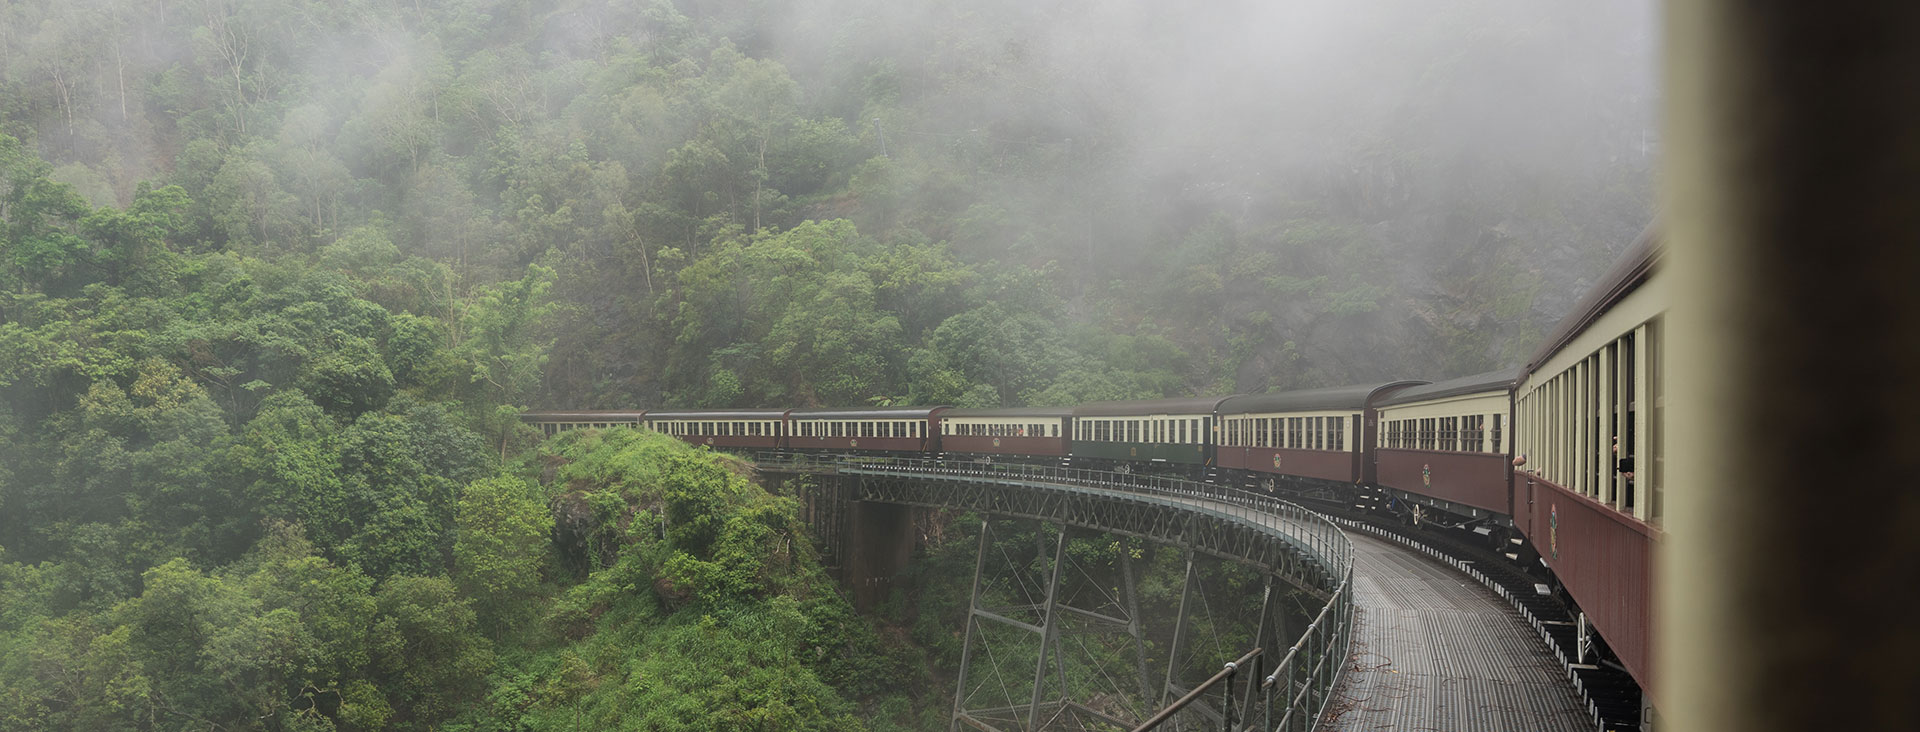 Experience the natural climate in the rainforest ecosystem through the Kuranda Scenic Railway - KKDay Top 15 Family Attractions in Brisbane, Gold Coast, and Cairns to Experience This Year